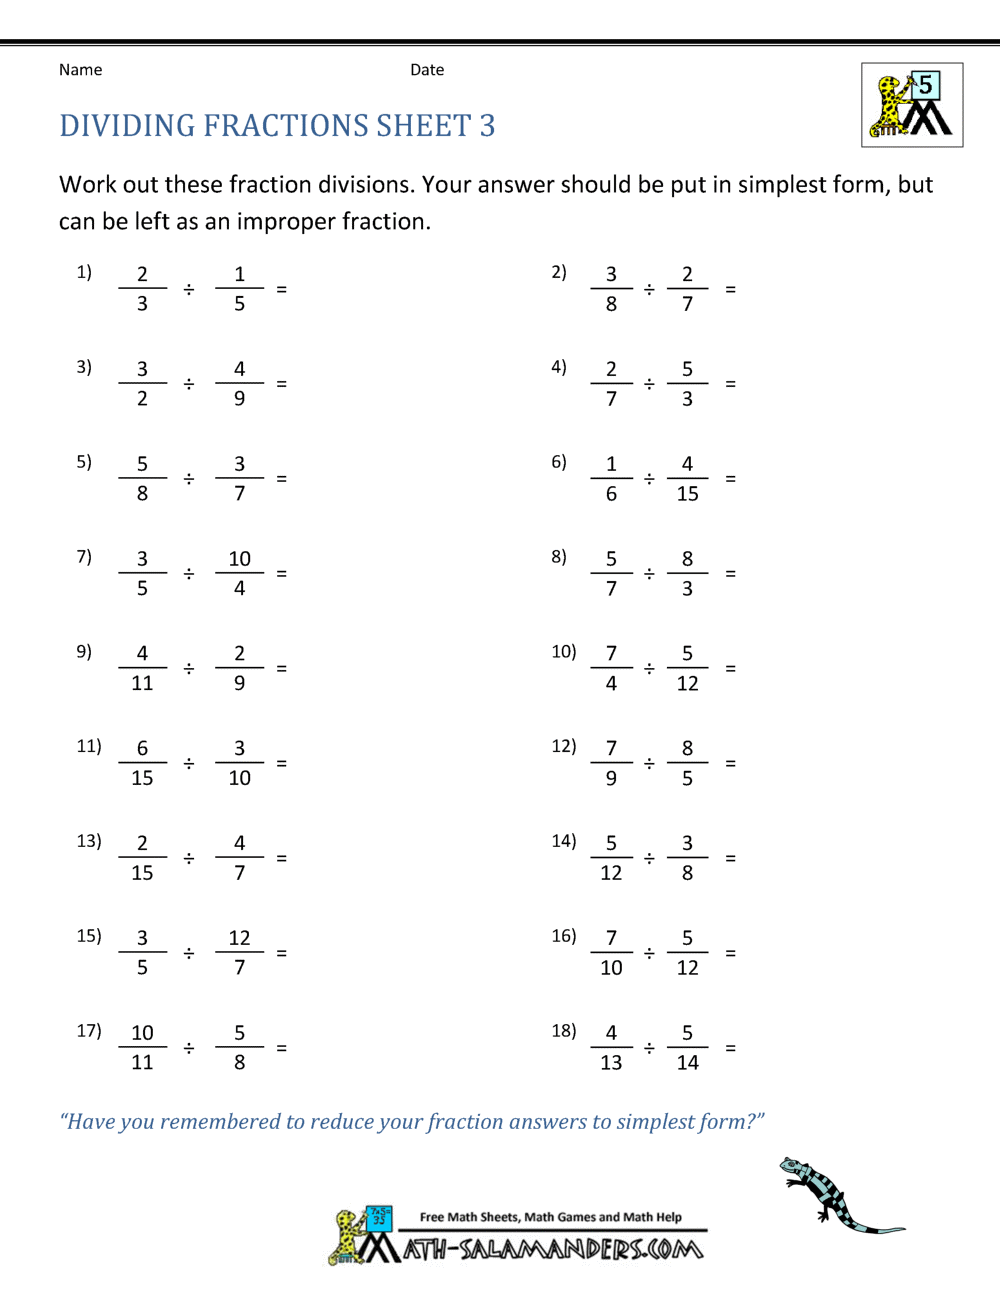 What are some tips for math practice with fractions?